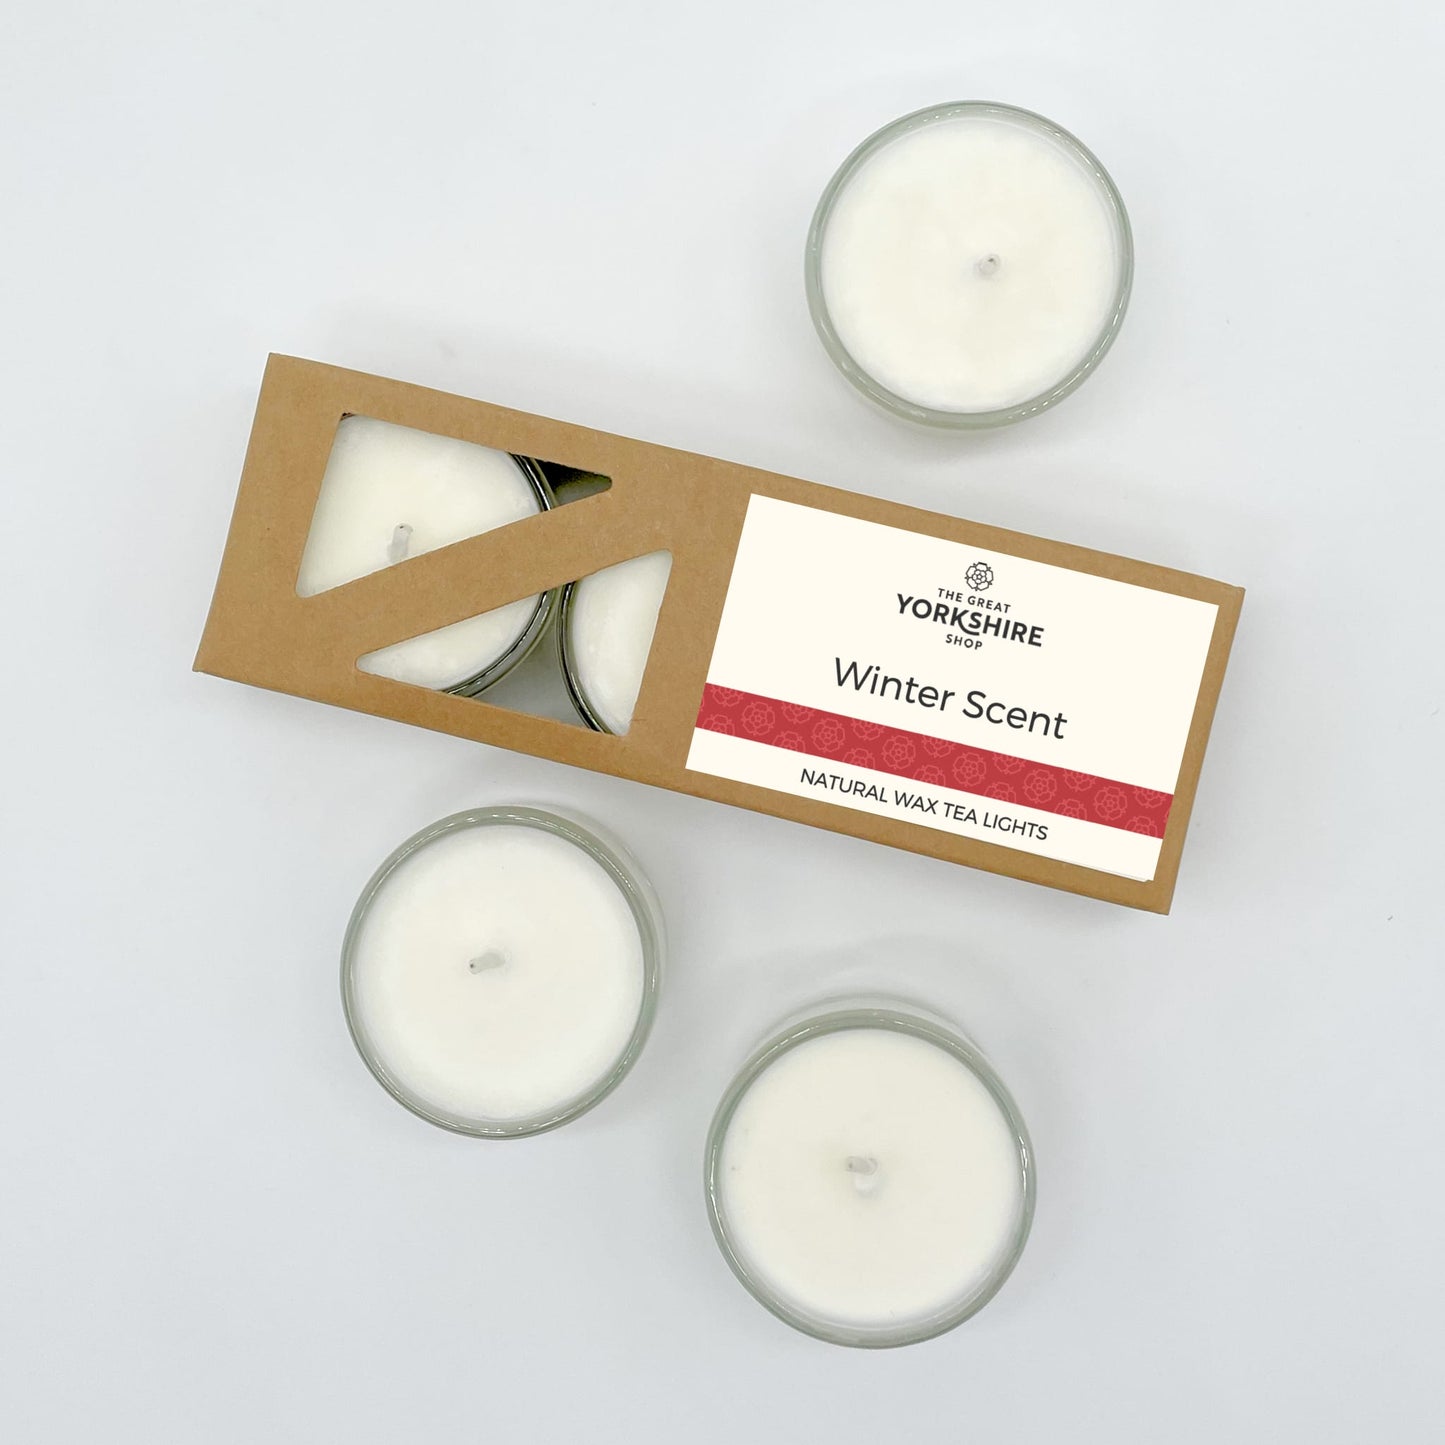 Winter Scent Natural Wax Tea Lights - The Great Yorkshire Shop